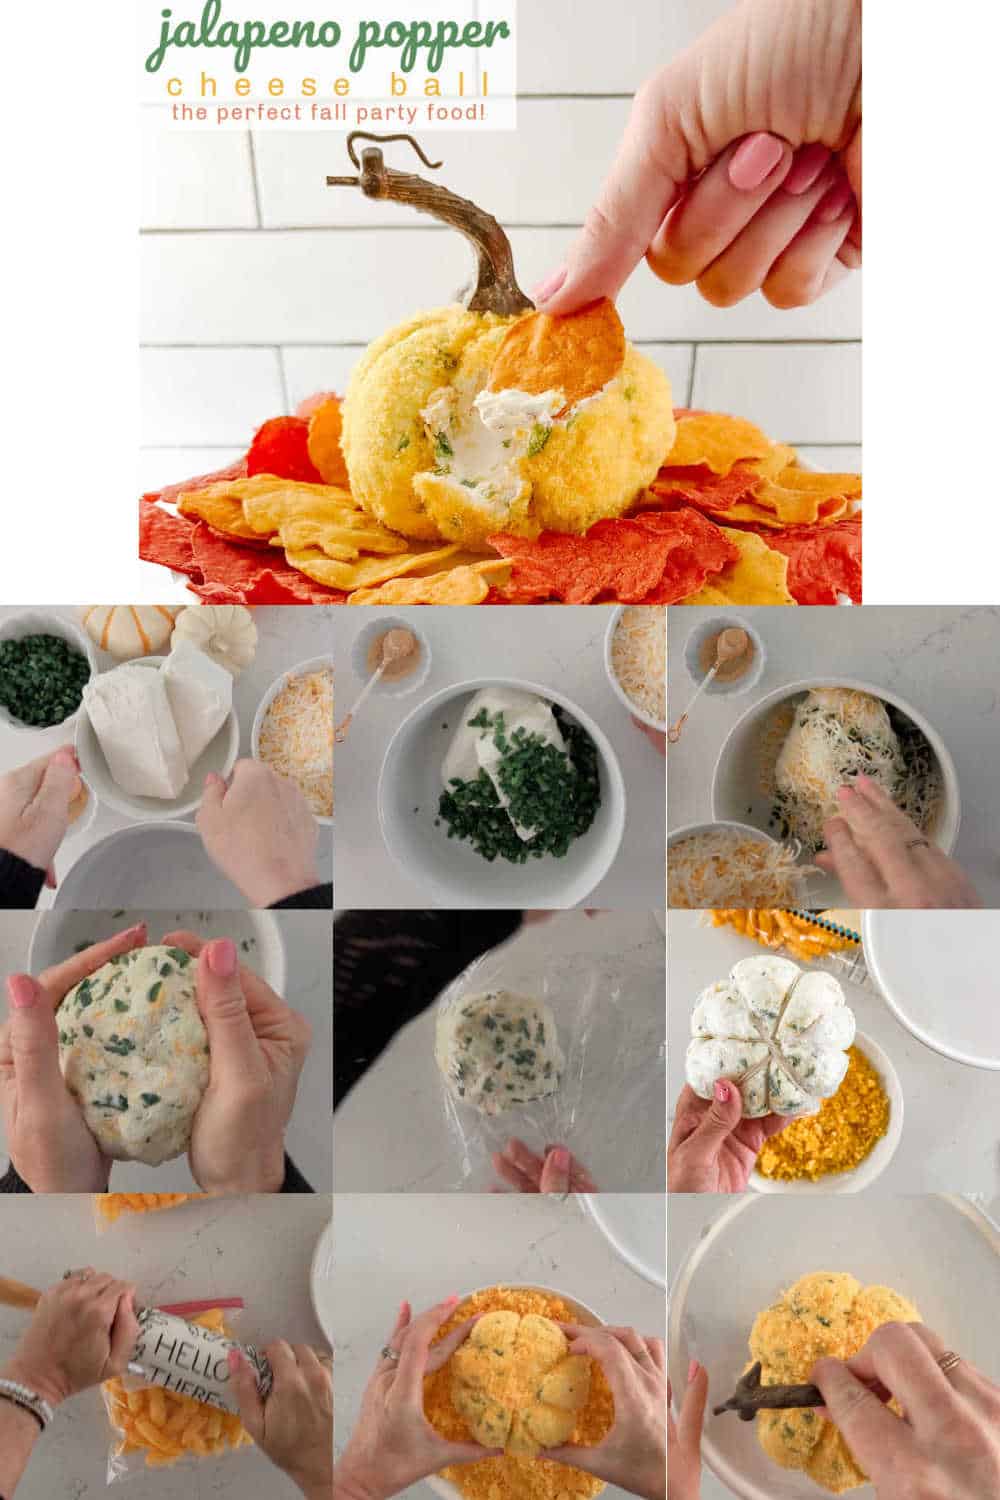 Jalapeno Popper Pumpkin-Shaped Cheese Ball. Celebrate fall with the perfect cheese ball appetizer that combines spicy jalapeno, creamy cheese filling and rolled in a layer of crushed cheese puffs. 